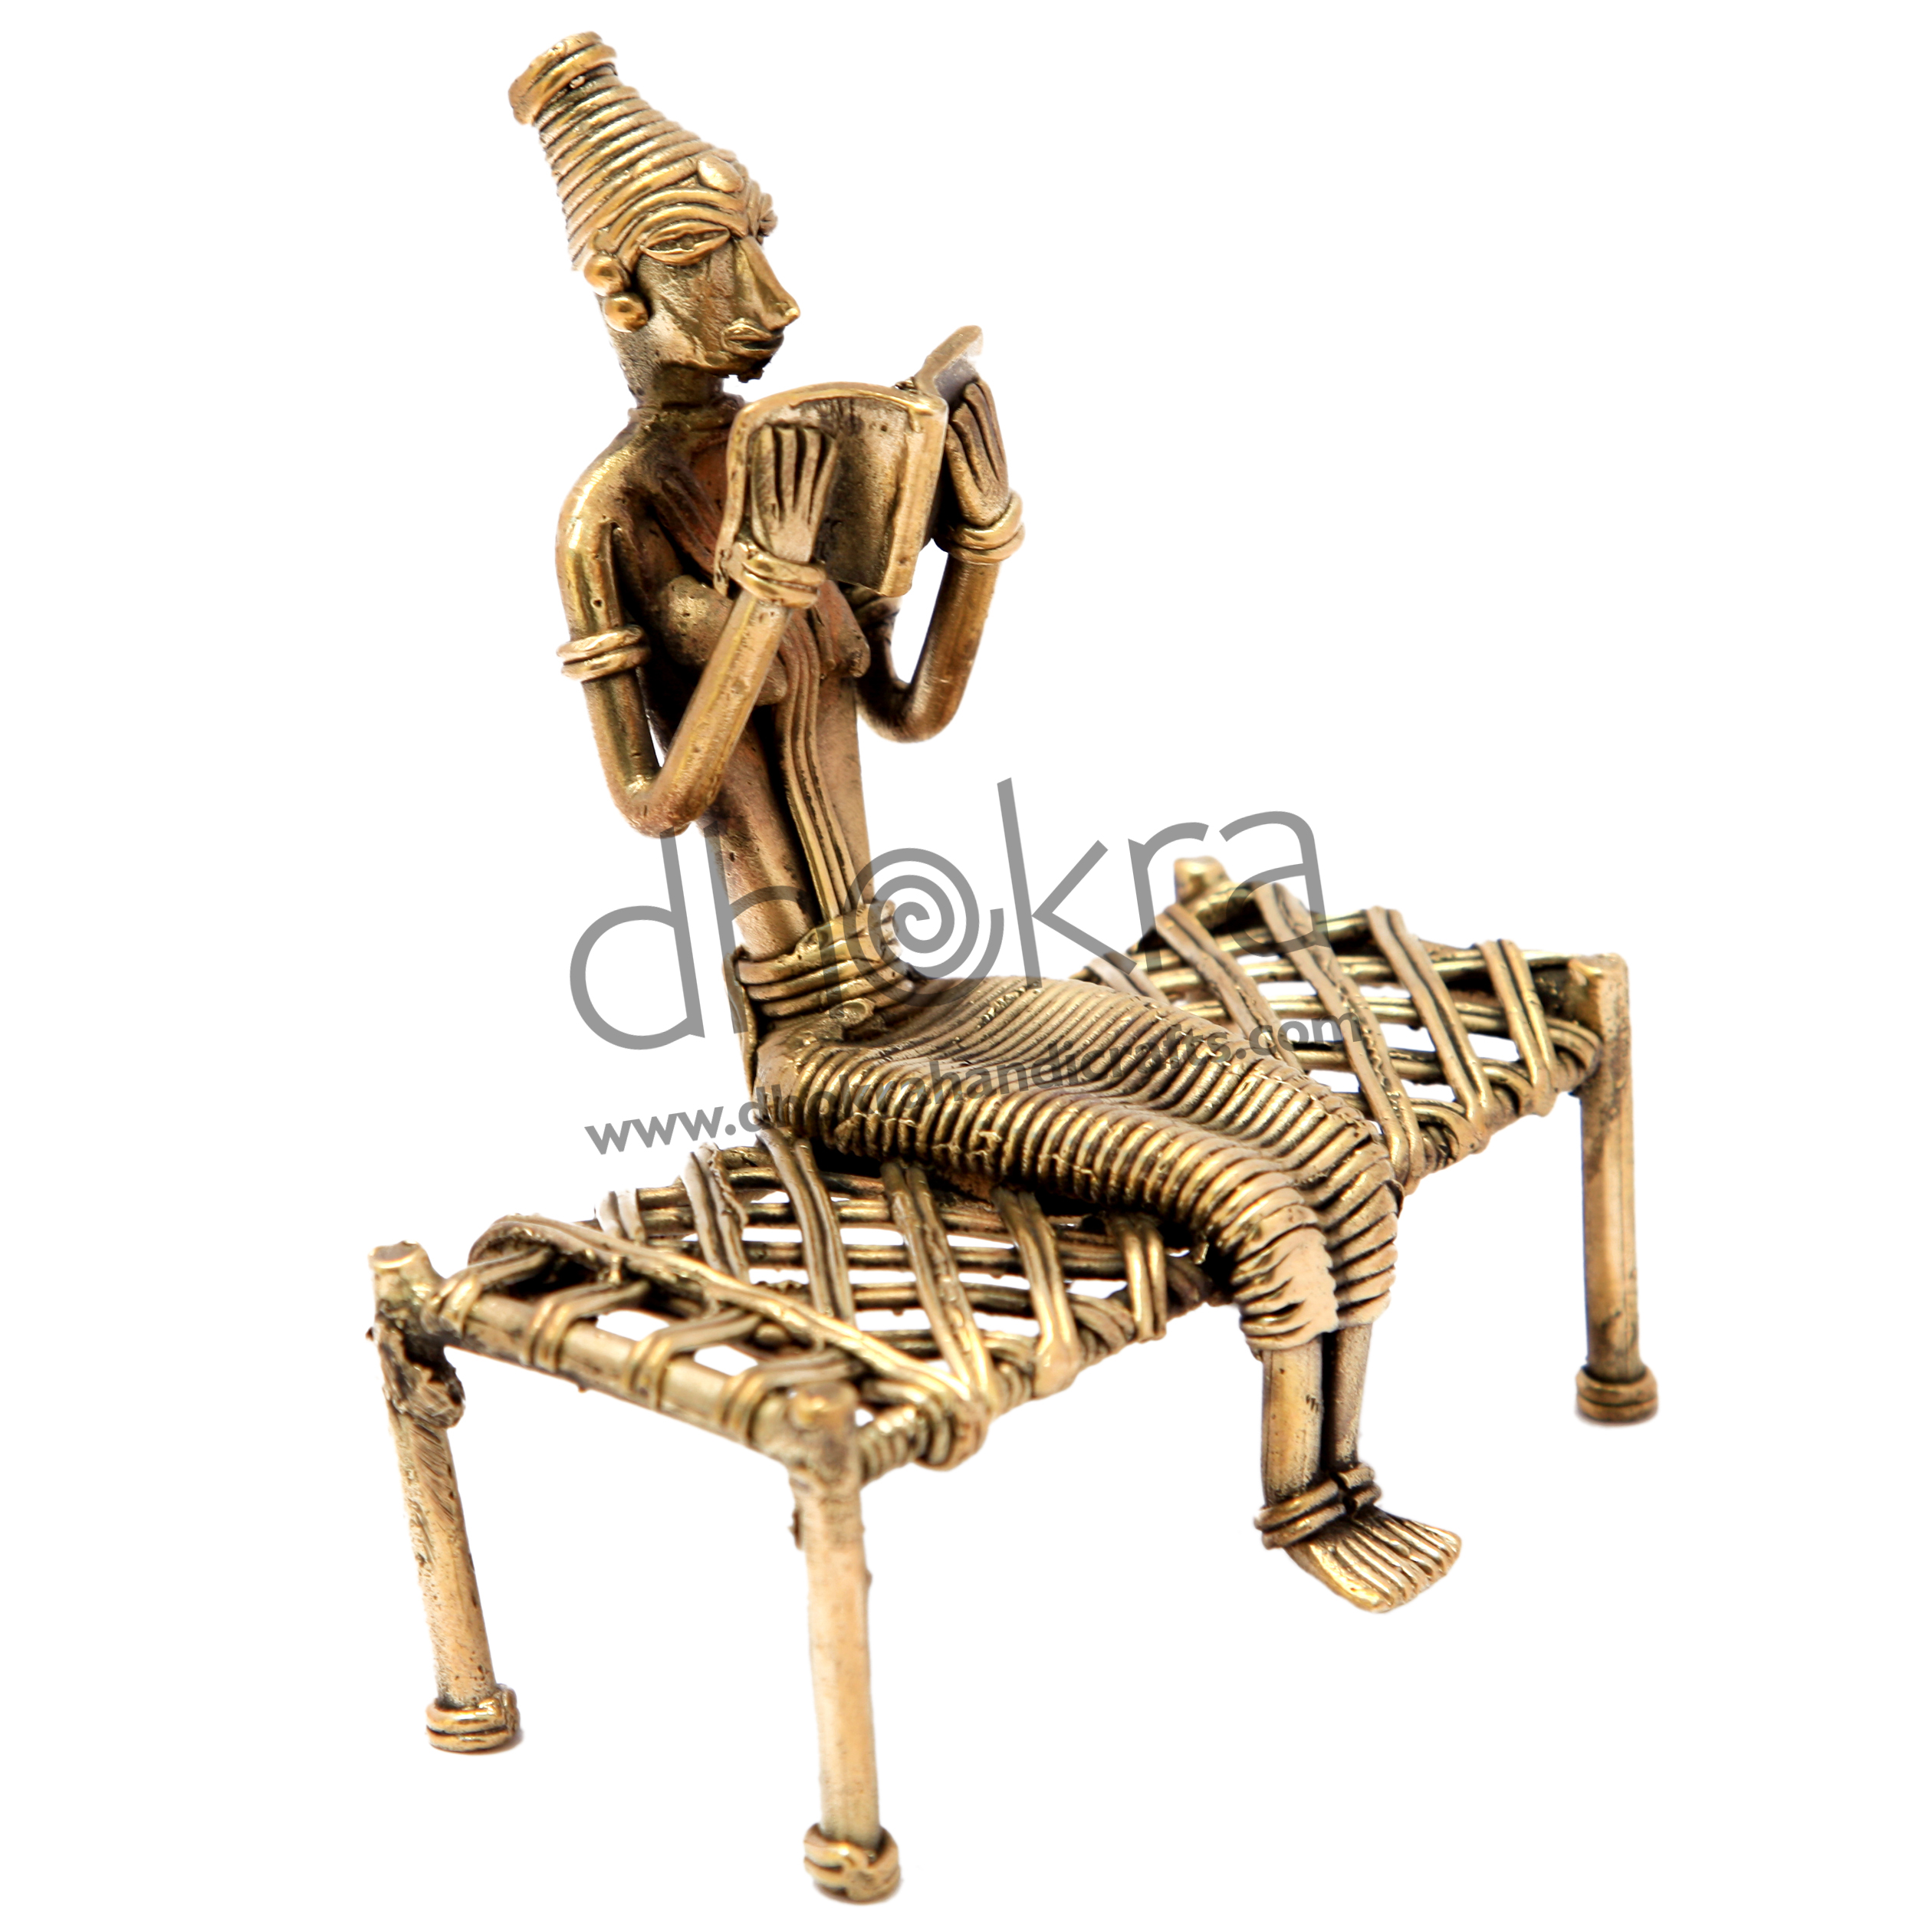 Dhokra Lady Sitting on a Cot